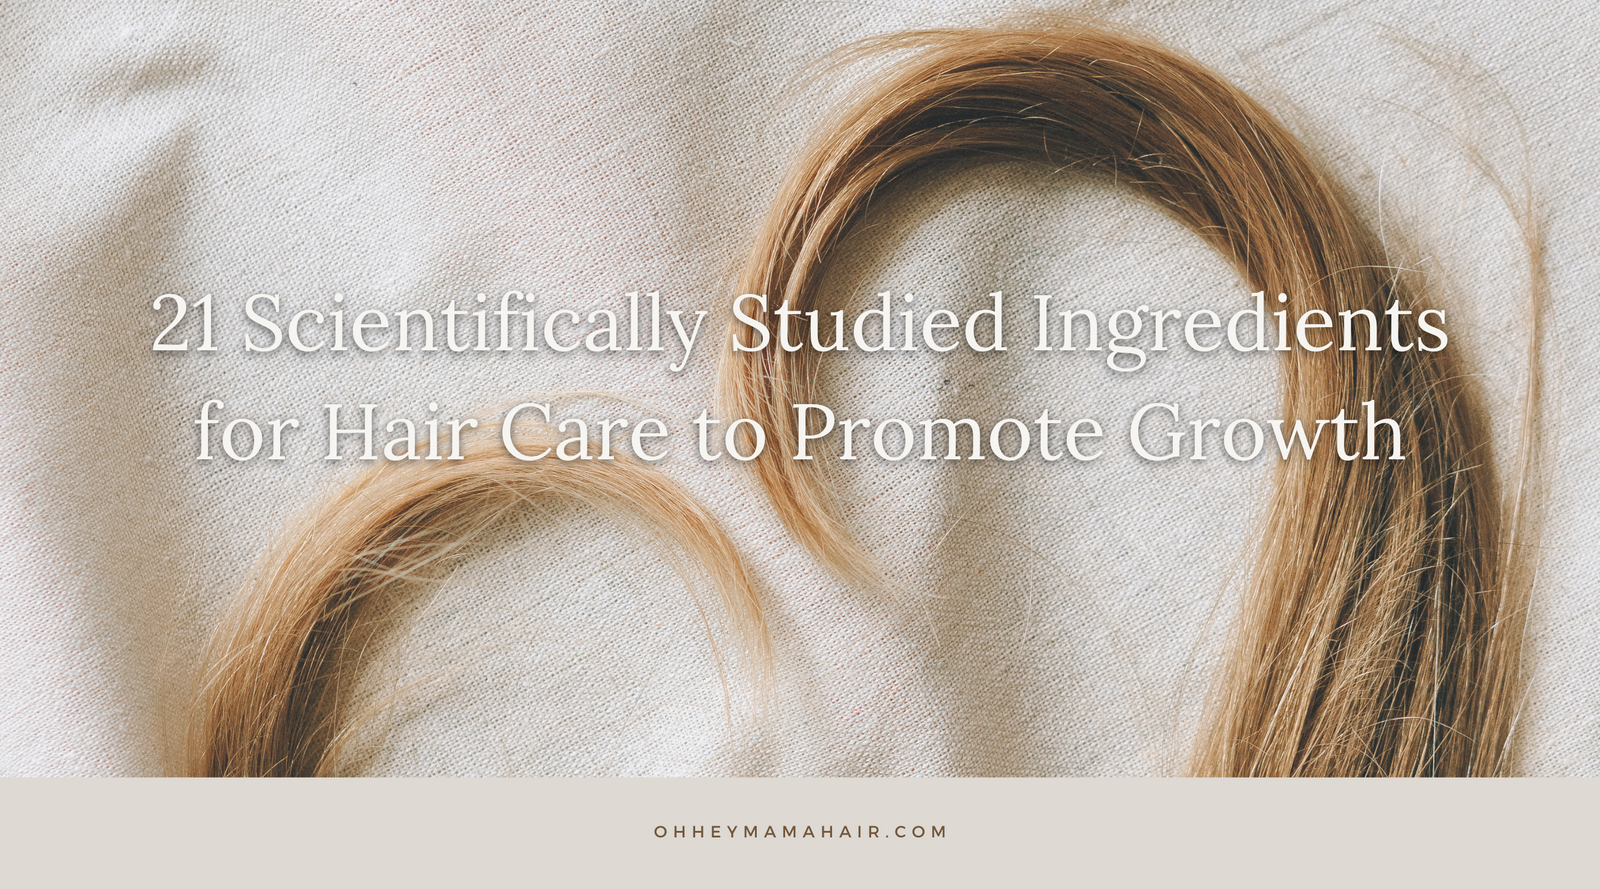 21 Scientifically Studied Ingredients for Hair Care to Promote Hair Growth